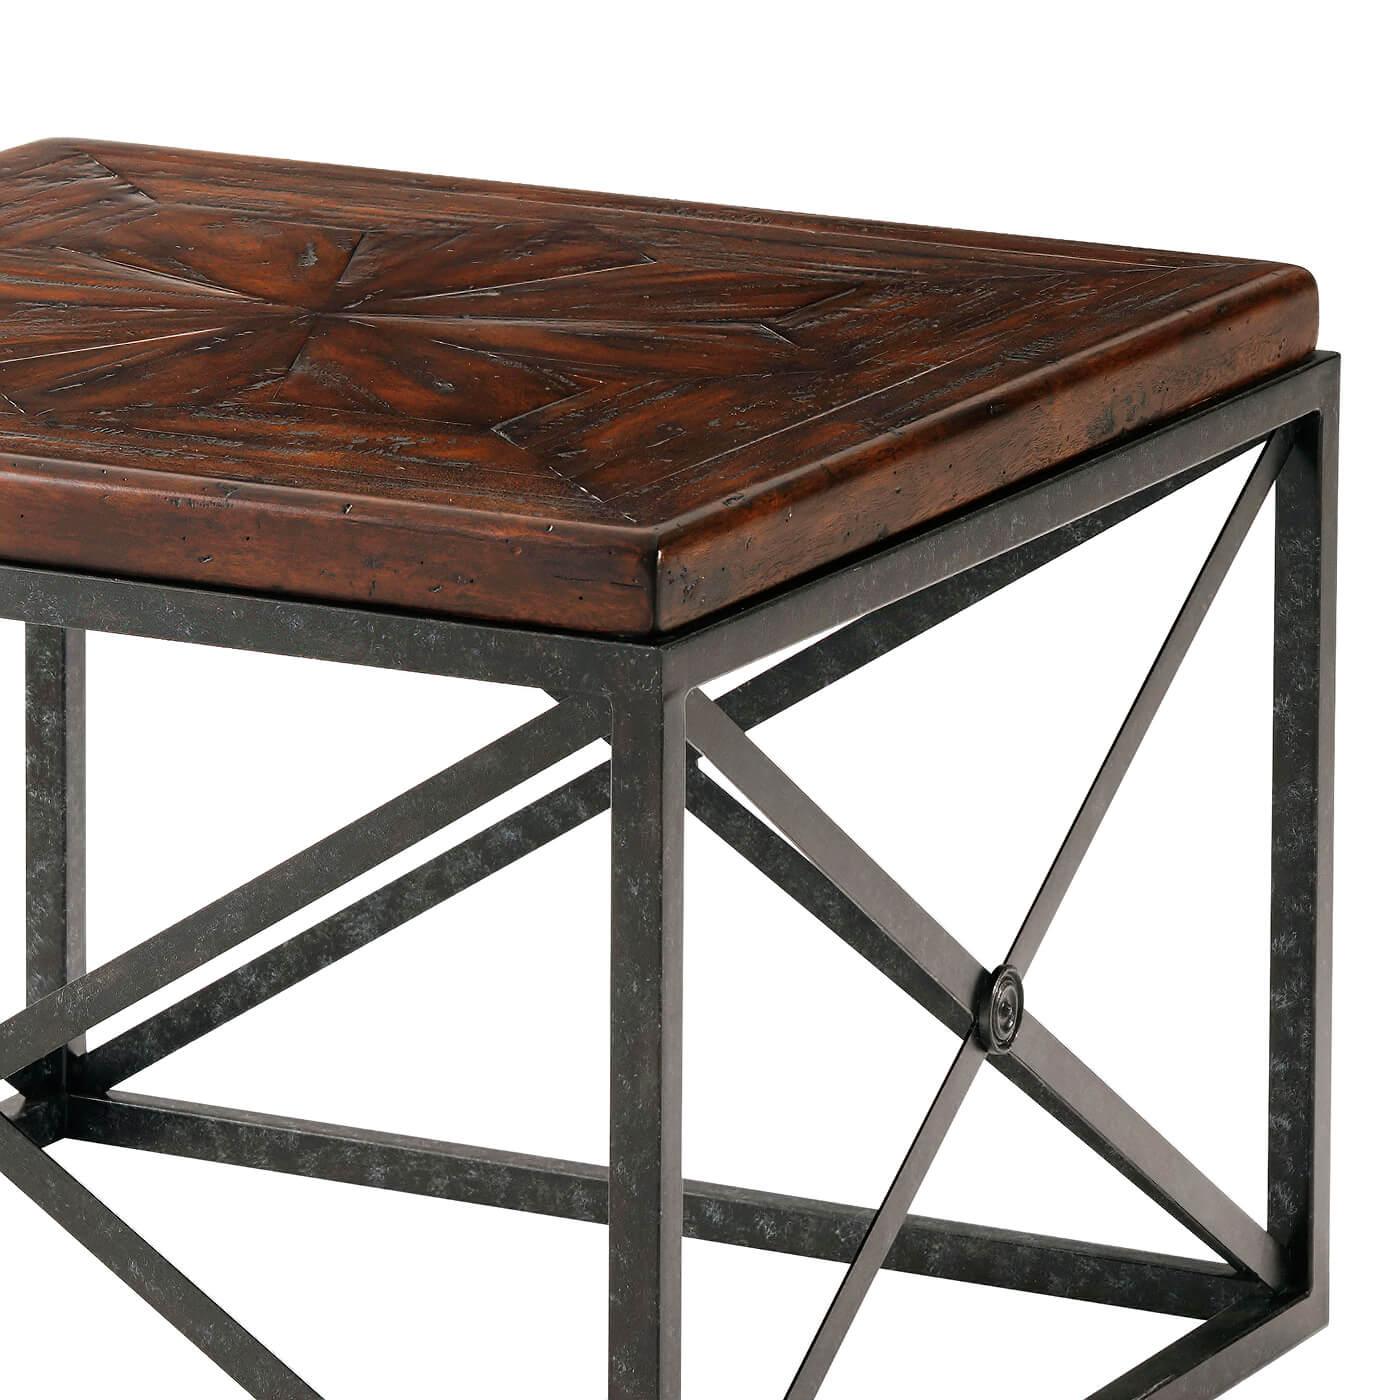 Industrial Campaign cocktail table an antiqued wood, brass and iron Campaign bunching cocktail table, the square stellar parquetry top on square verdigris legs joined by 'X' sides.

Dimensions: 28.5